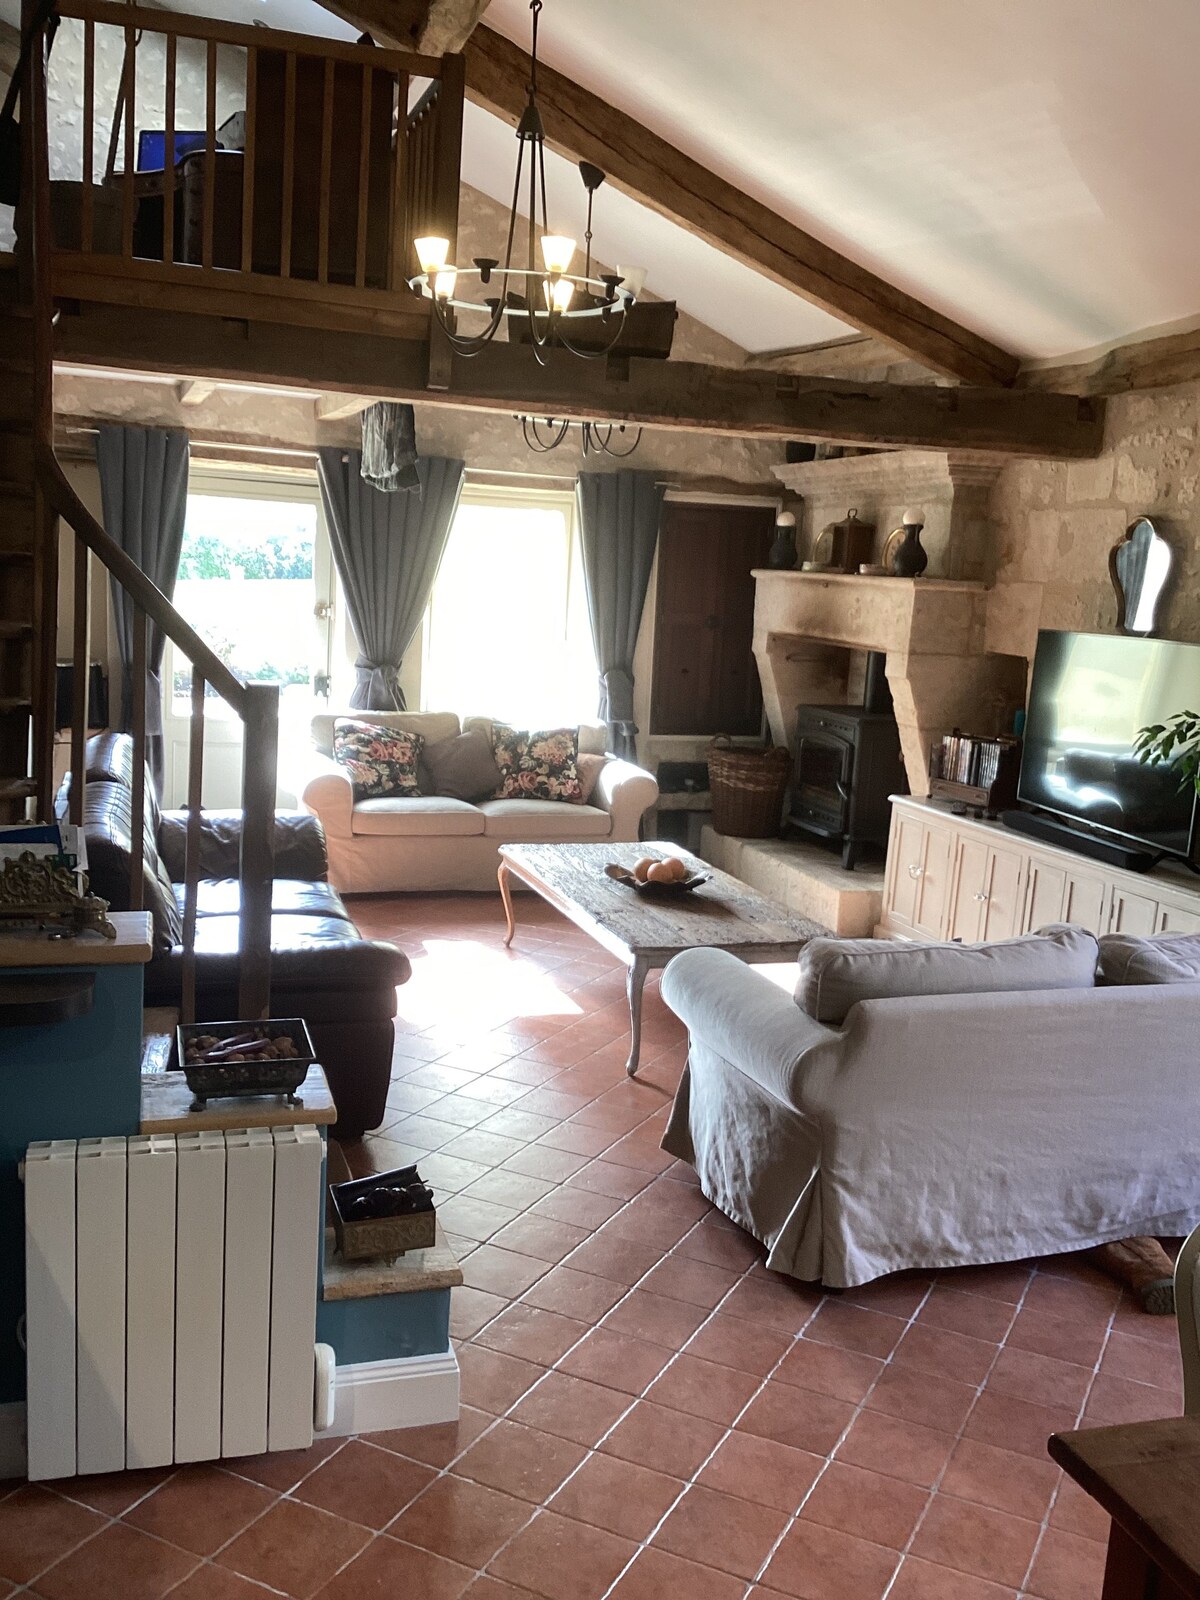 Home with private pool near Aubeterre- sur -Dronne